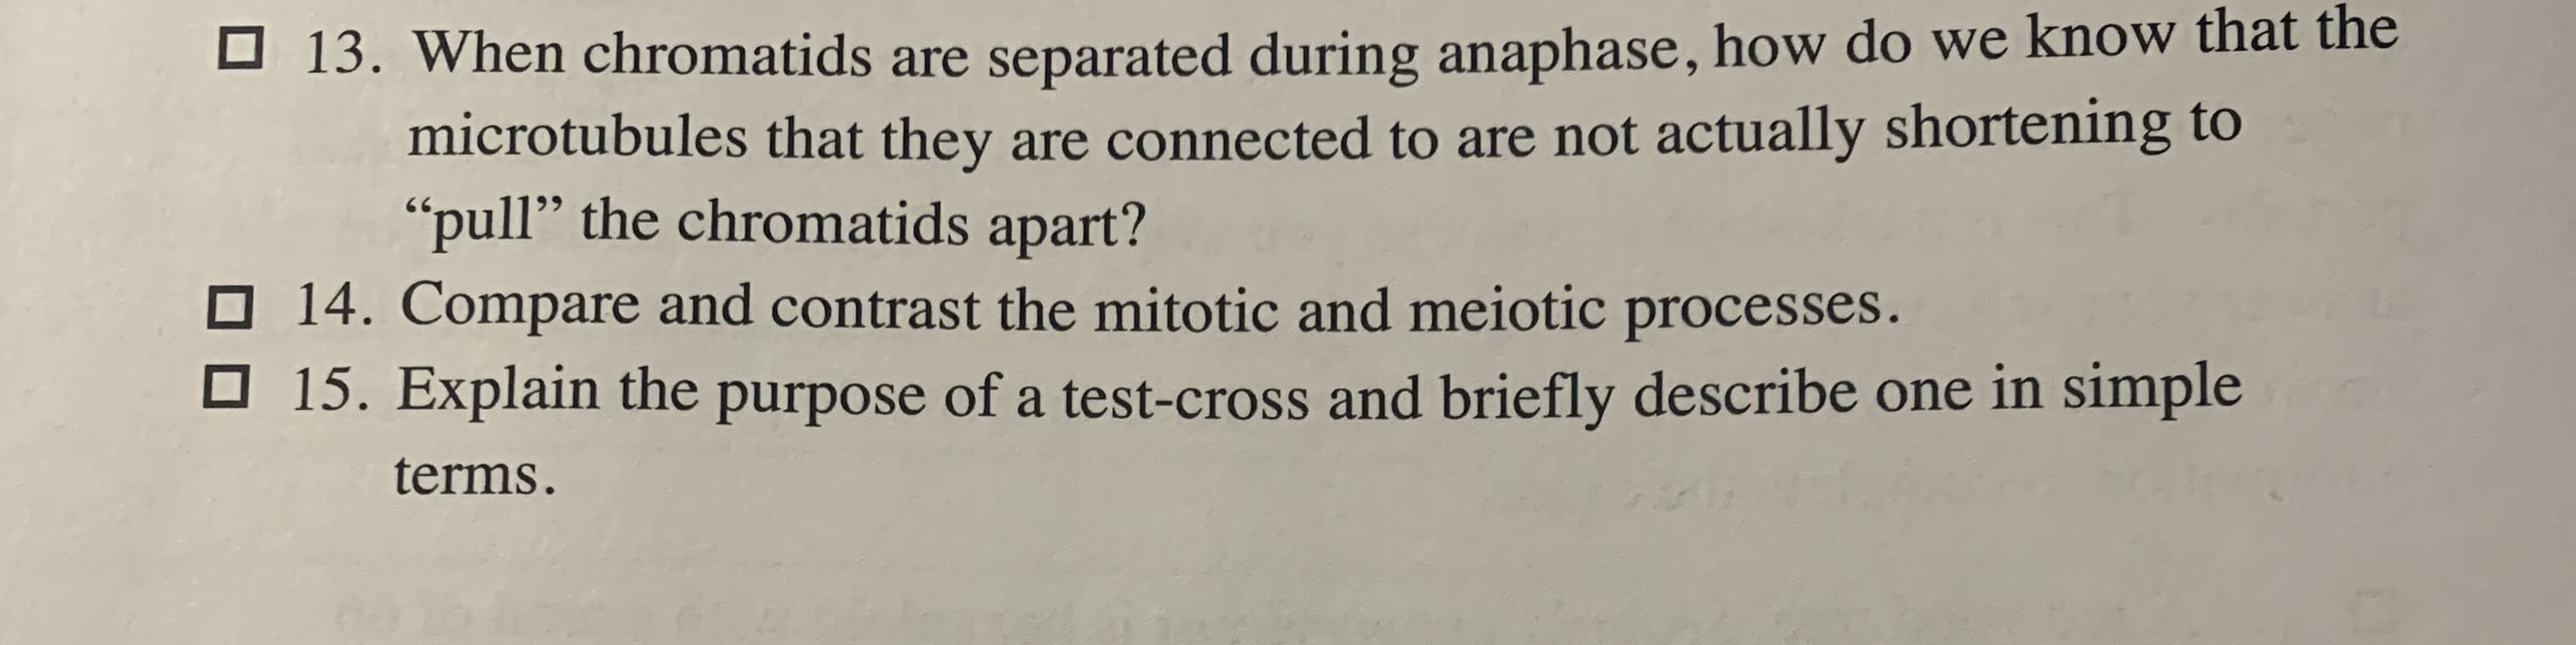 13. When chromatids are separated during anaphase, how do we know that the
microtubules that they are connected to are not actually shortening to
"pull" the chromatids apart?
O 14. Compare and contrast the mitotic and meiotic processes.
15. Explain the purpose of a test-cross and briefly describe one in simple
terms.
